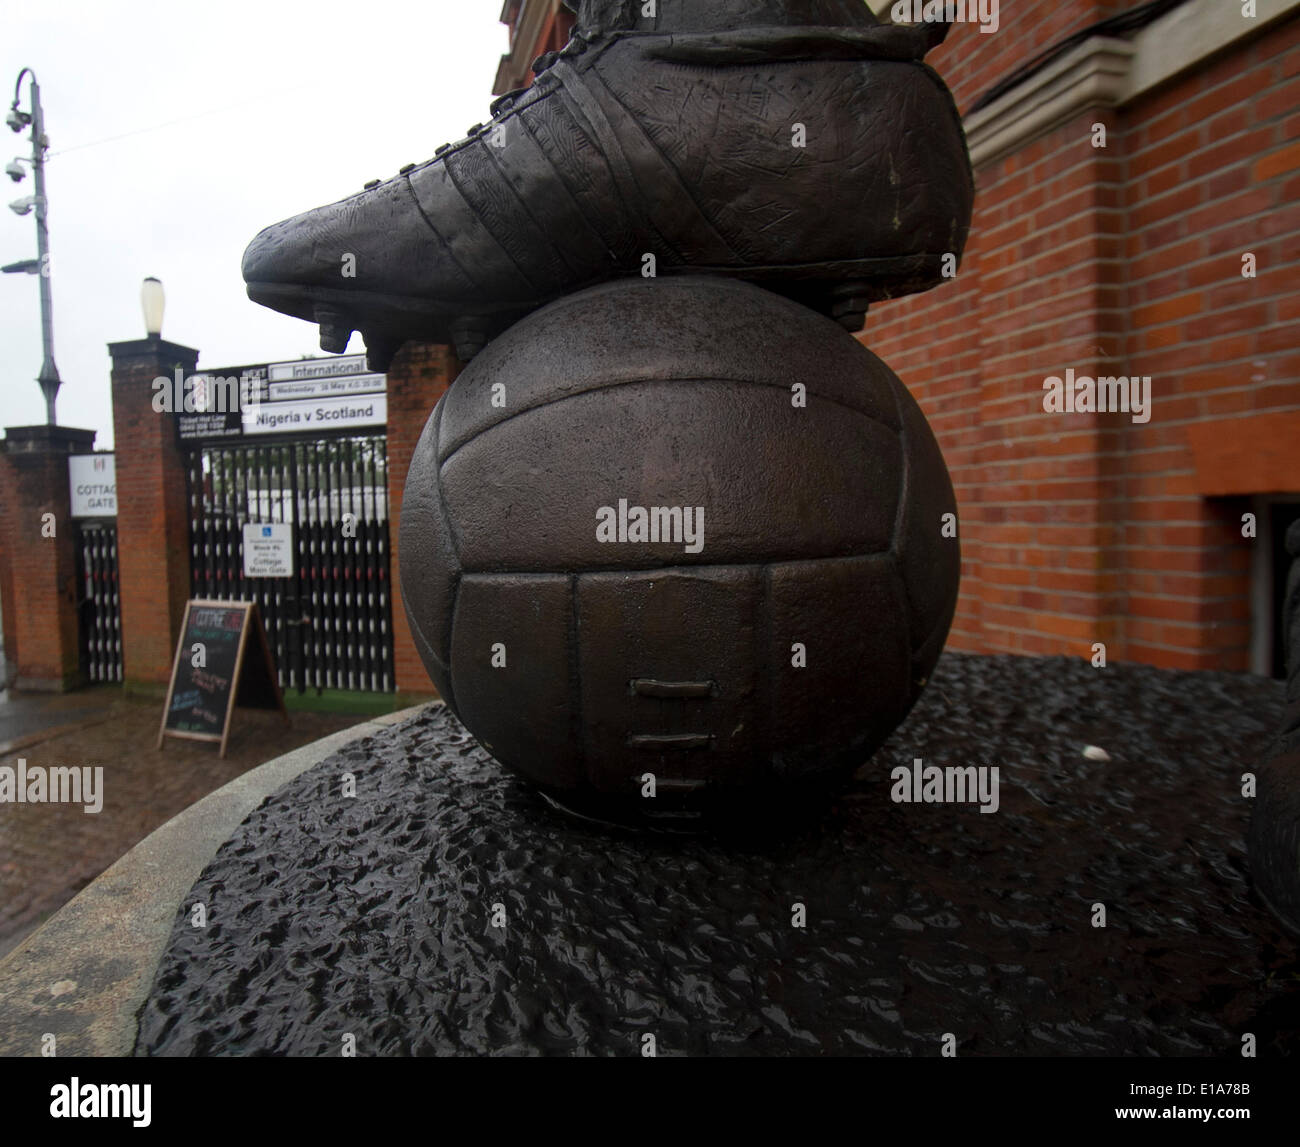 London UK. 28th May 2014. The international football fixture between Scotland and Nigeria at Craven Cottage is being investigated after the (SFA) Scottish Football Association was contacted by the National Crime Agency for alleged match fixing. Credit:  amer ghazzal/Alamy Live News Stock Photo